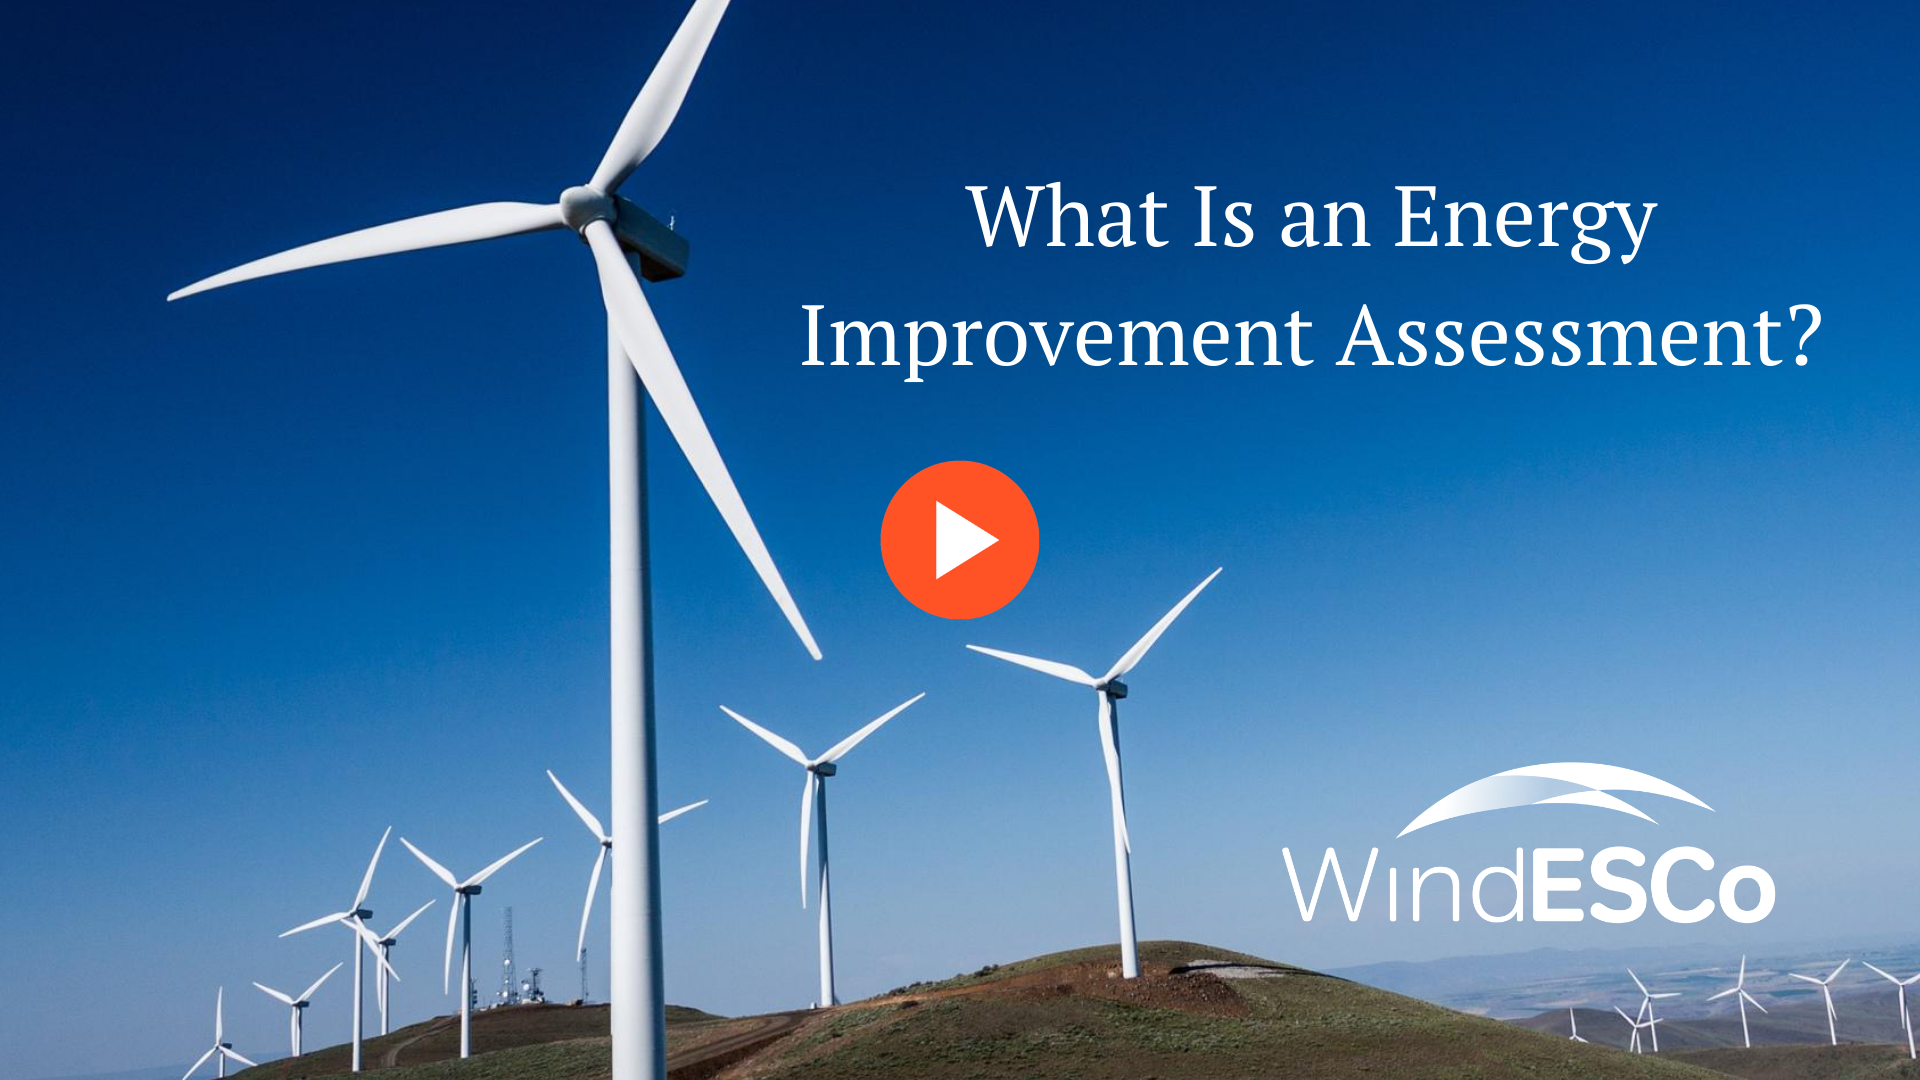 WindESCo | What Is an Energy Improvement Assessment?